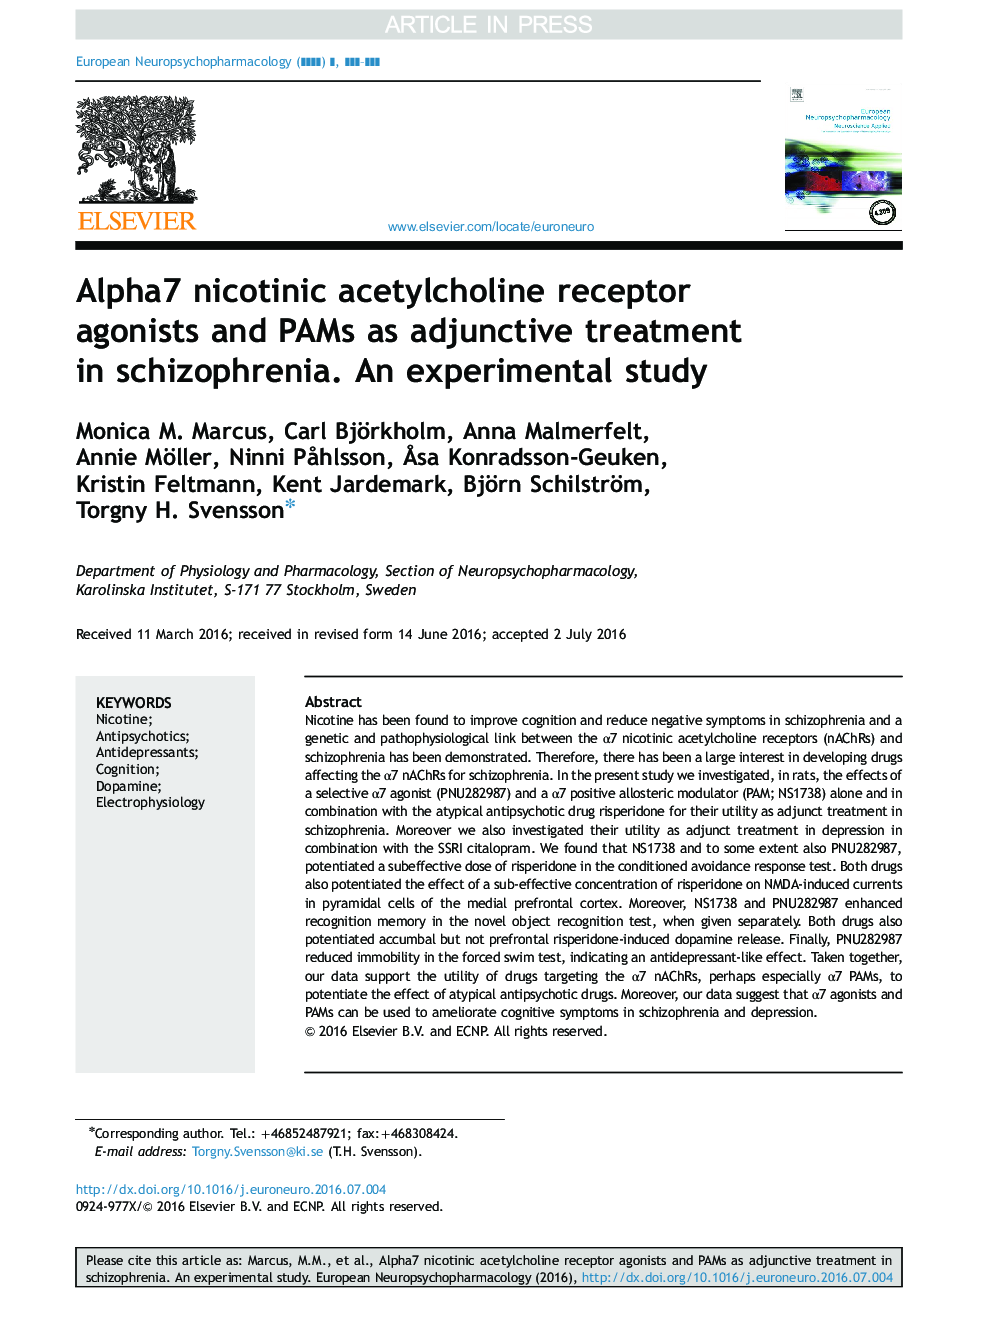 Alpha7 nicotinic acetylcholine receptor agonists and PAMs as adjunctive treatment in schizophrenia. An experimental study